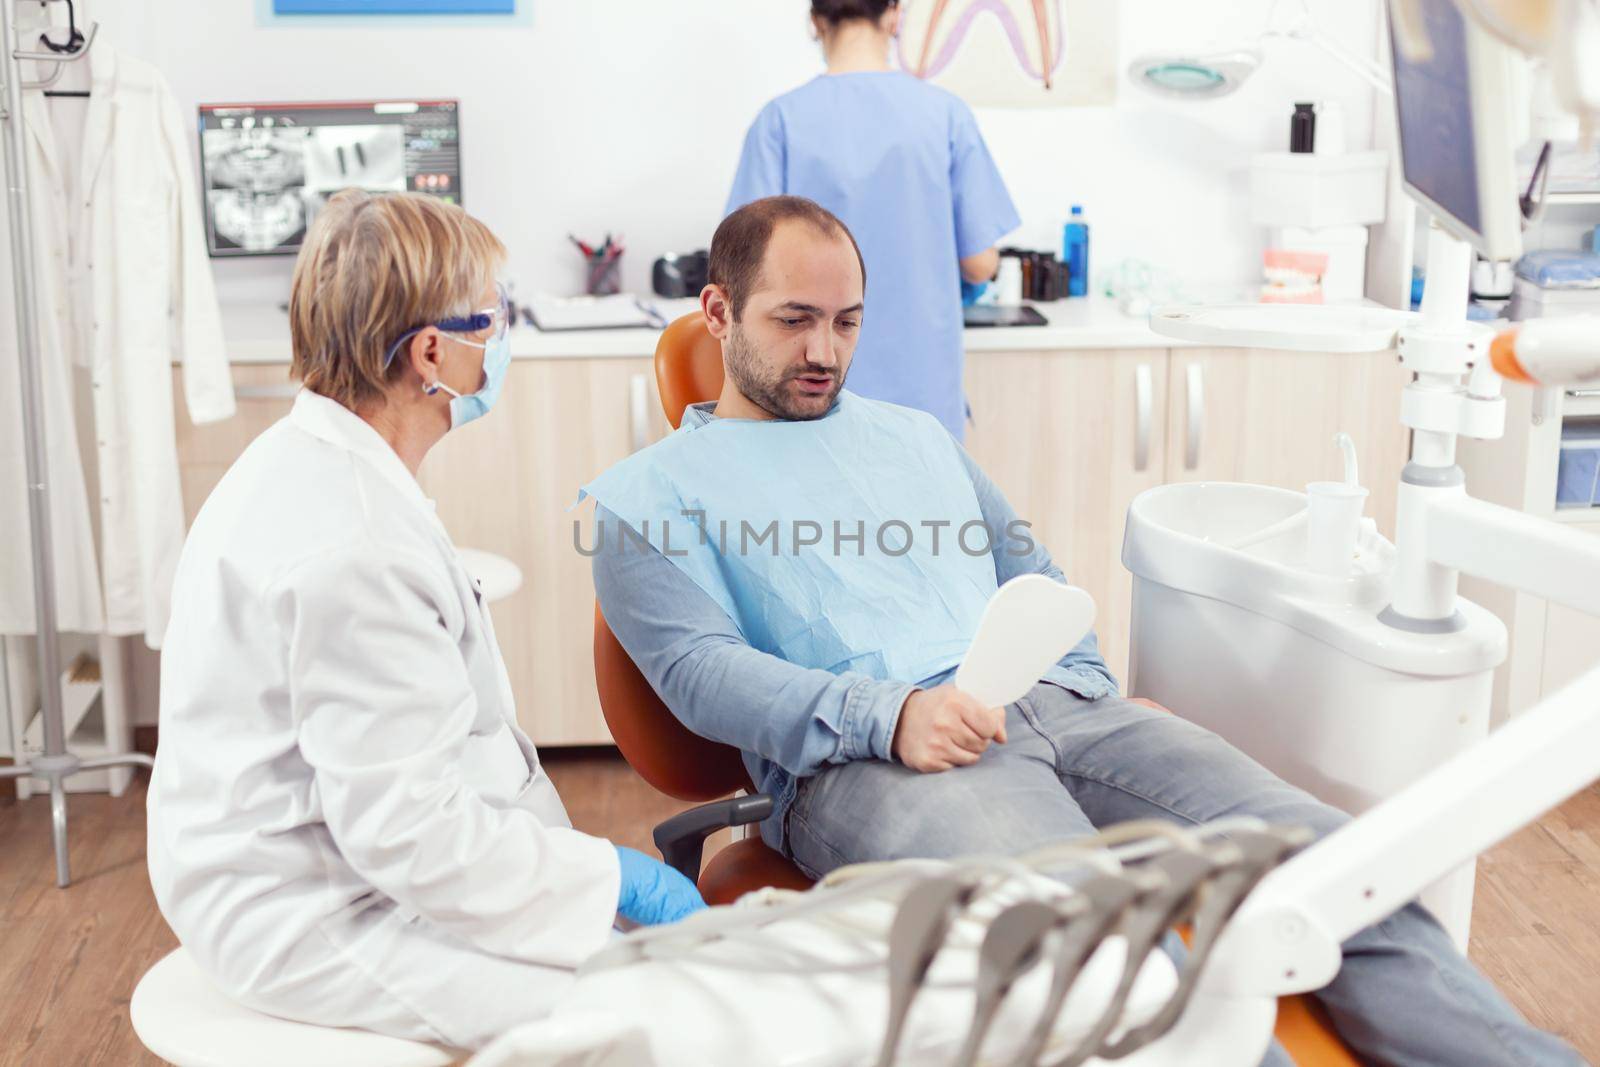 Man patient looking in mirror after medical stomatological team finising dental surgery during stomatology procedure. Senior doctor explaining healthcare treatment for toothache pain